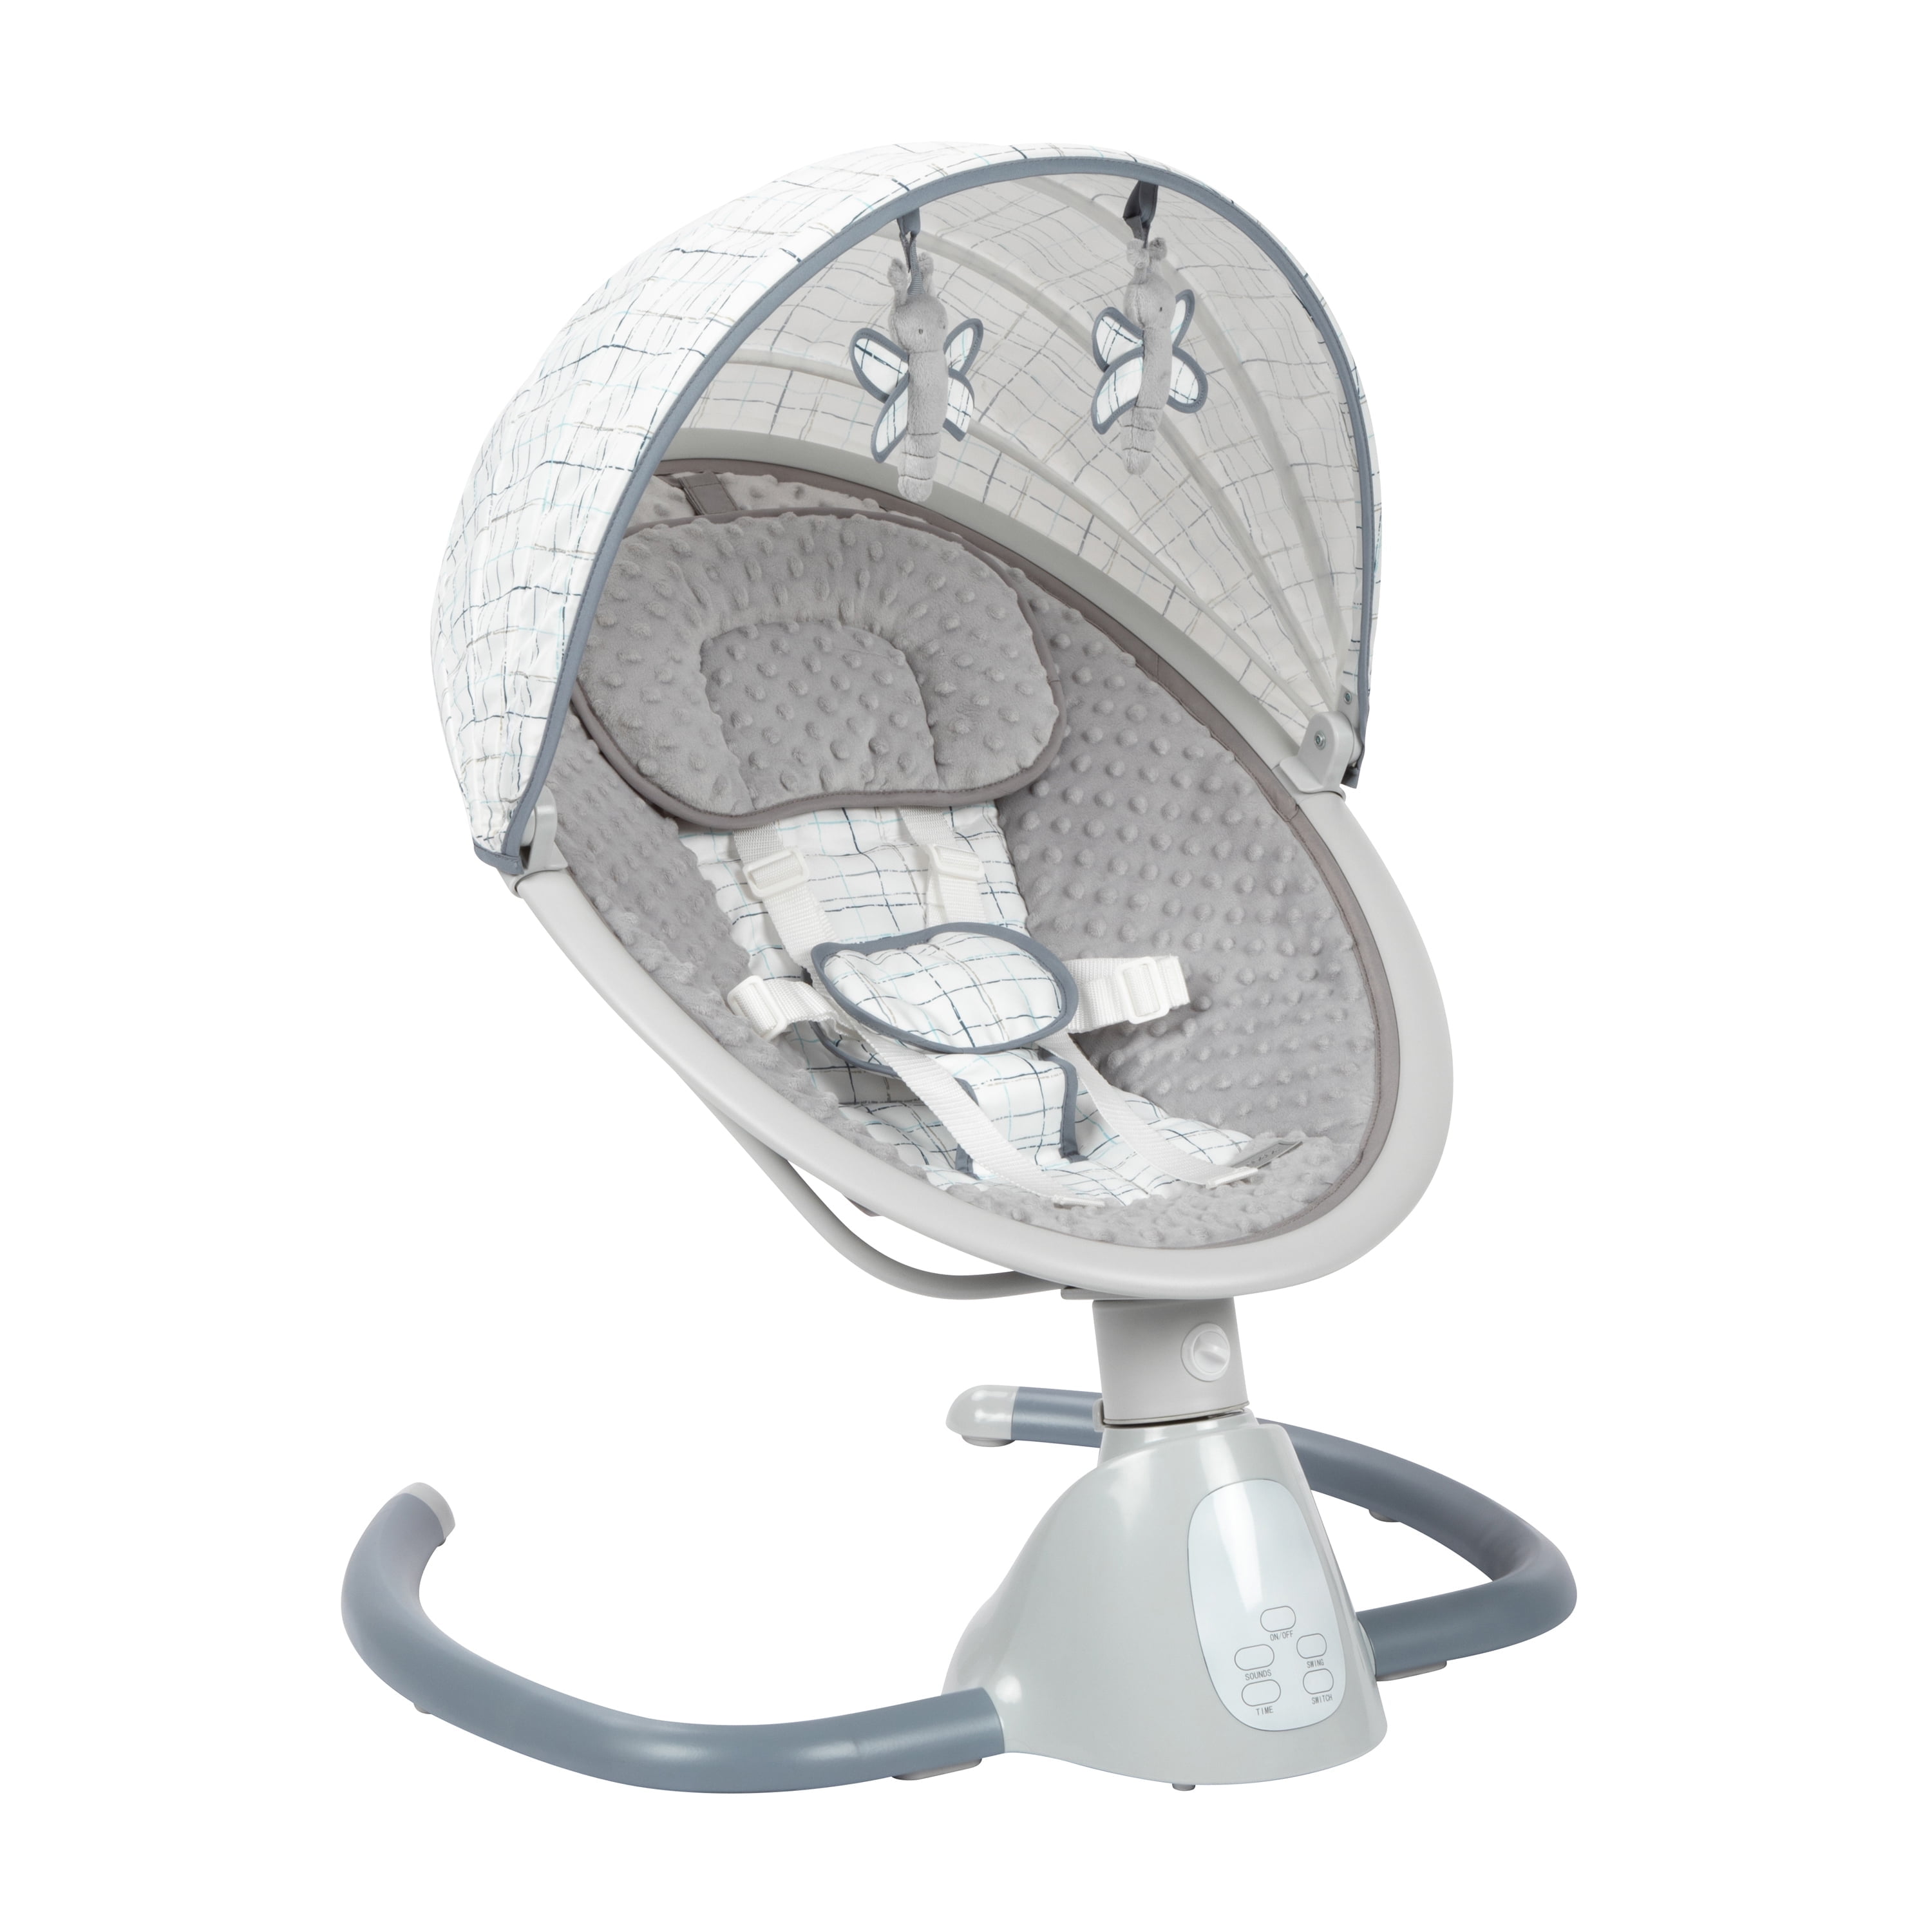 Monbebe Tranquility Bluetooth Enabled Indoor Baby Swing, Plaid